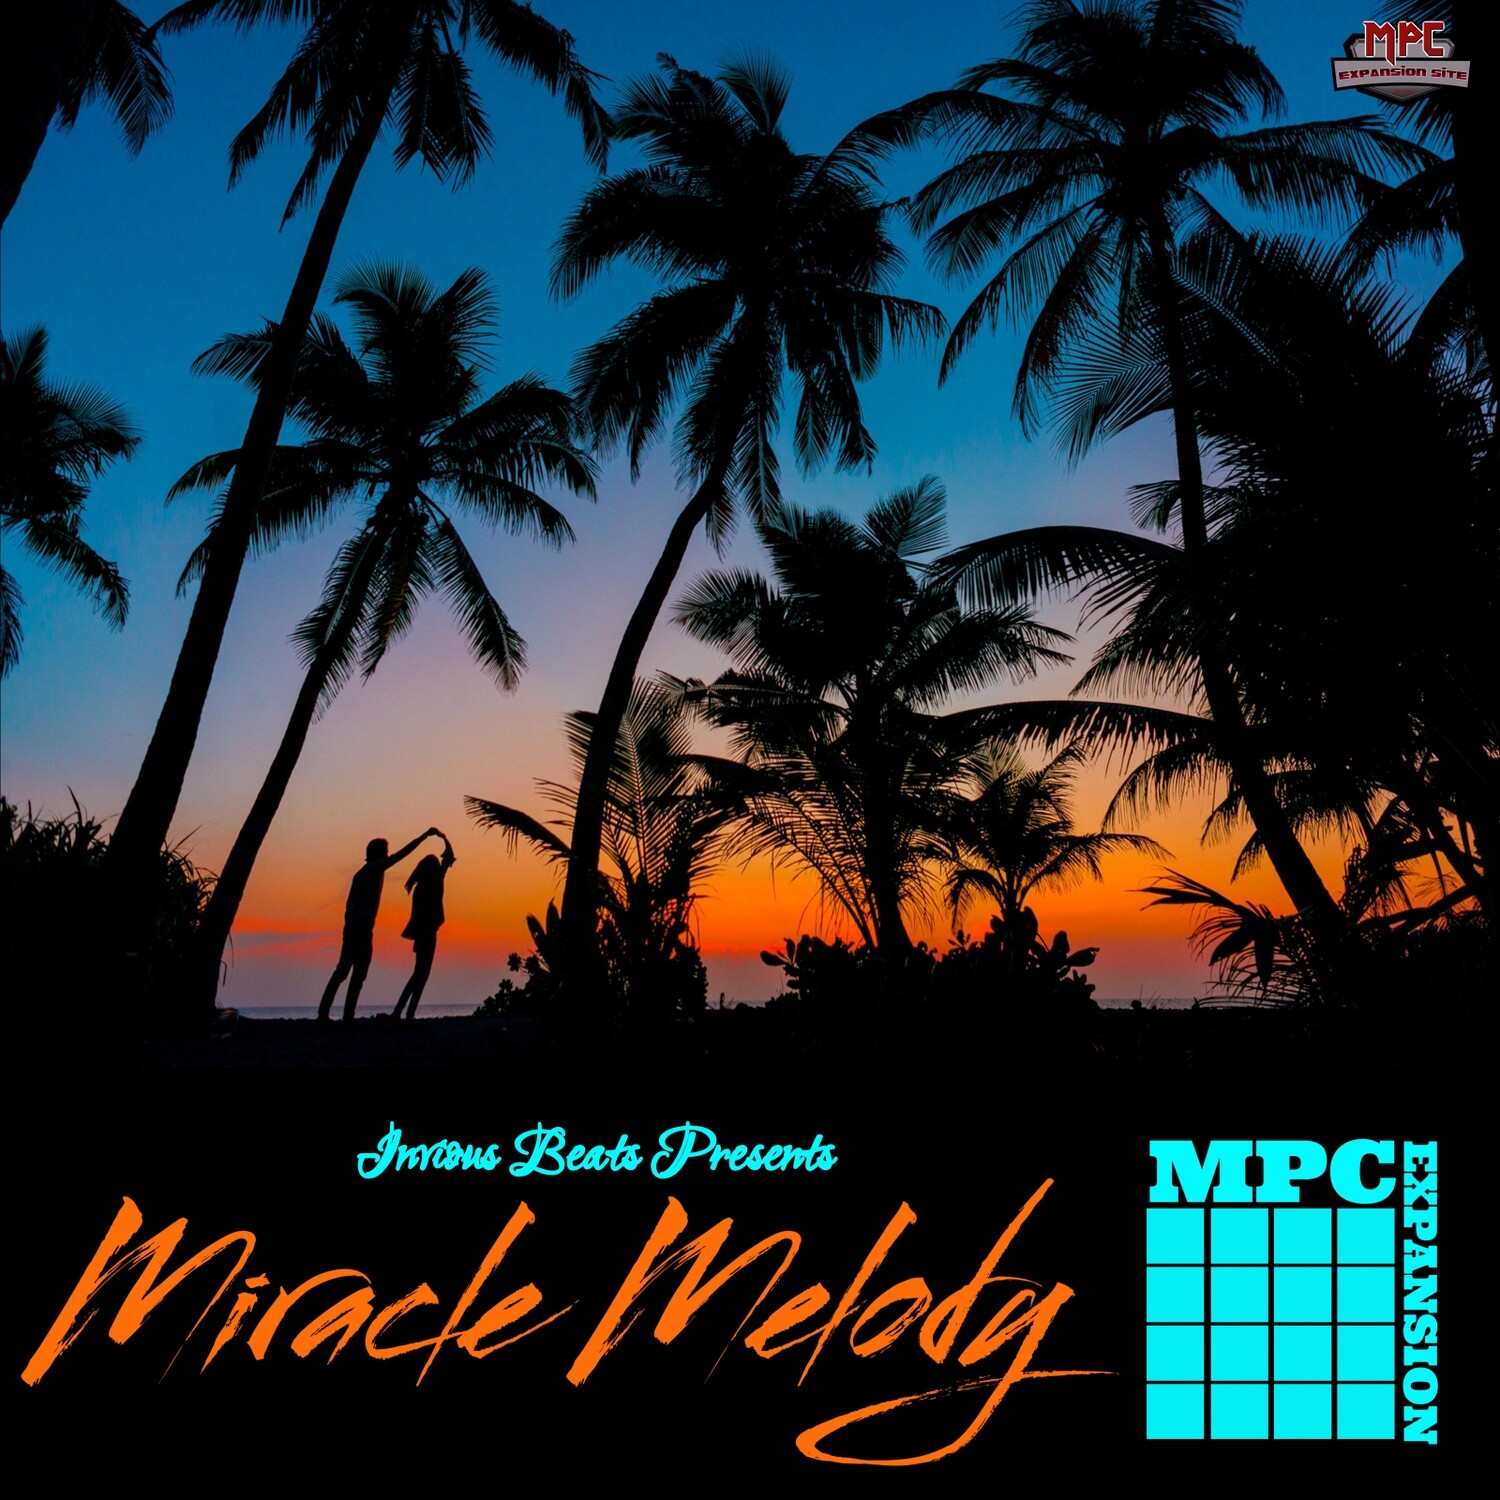 MPC EXPANSION 'MIRACLE MELODY' by INVIOUS